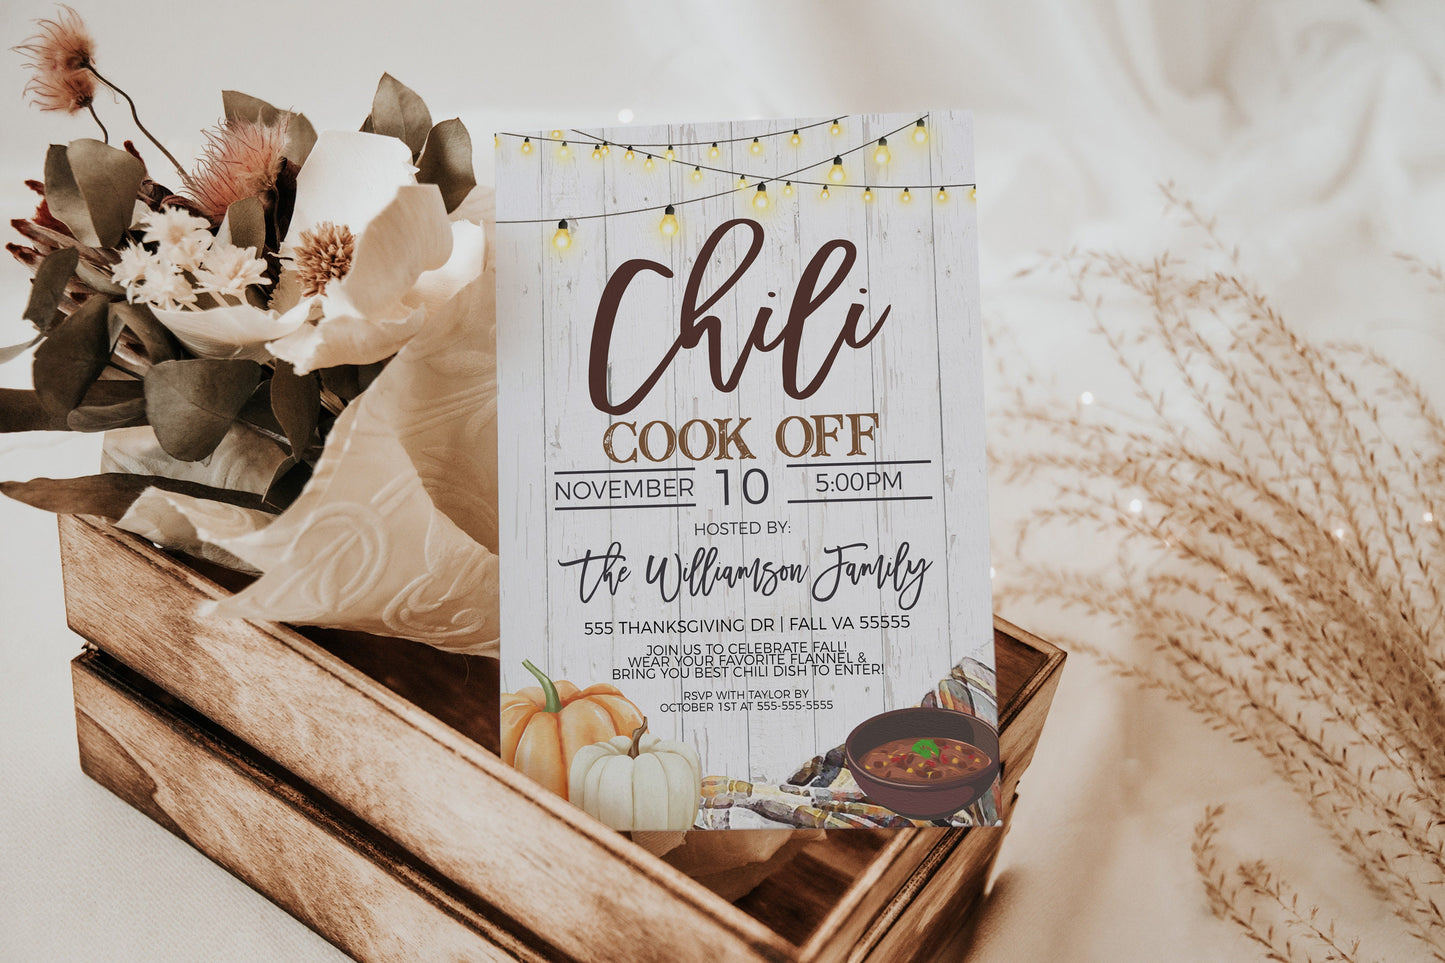 Chili Cook Off Invitation, Chili Cook-off Tasting Competition Invite, Fall Rustic Autumn Chili CookOff Party, Printable Editable Template